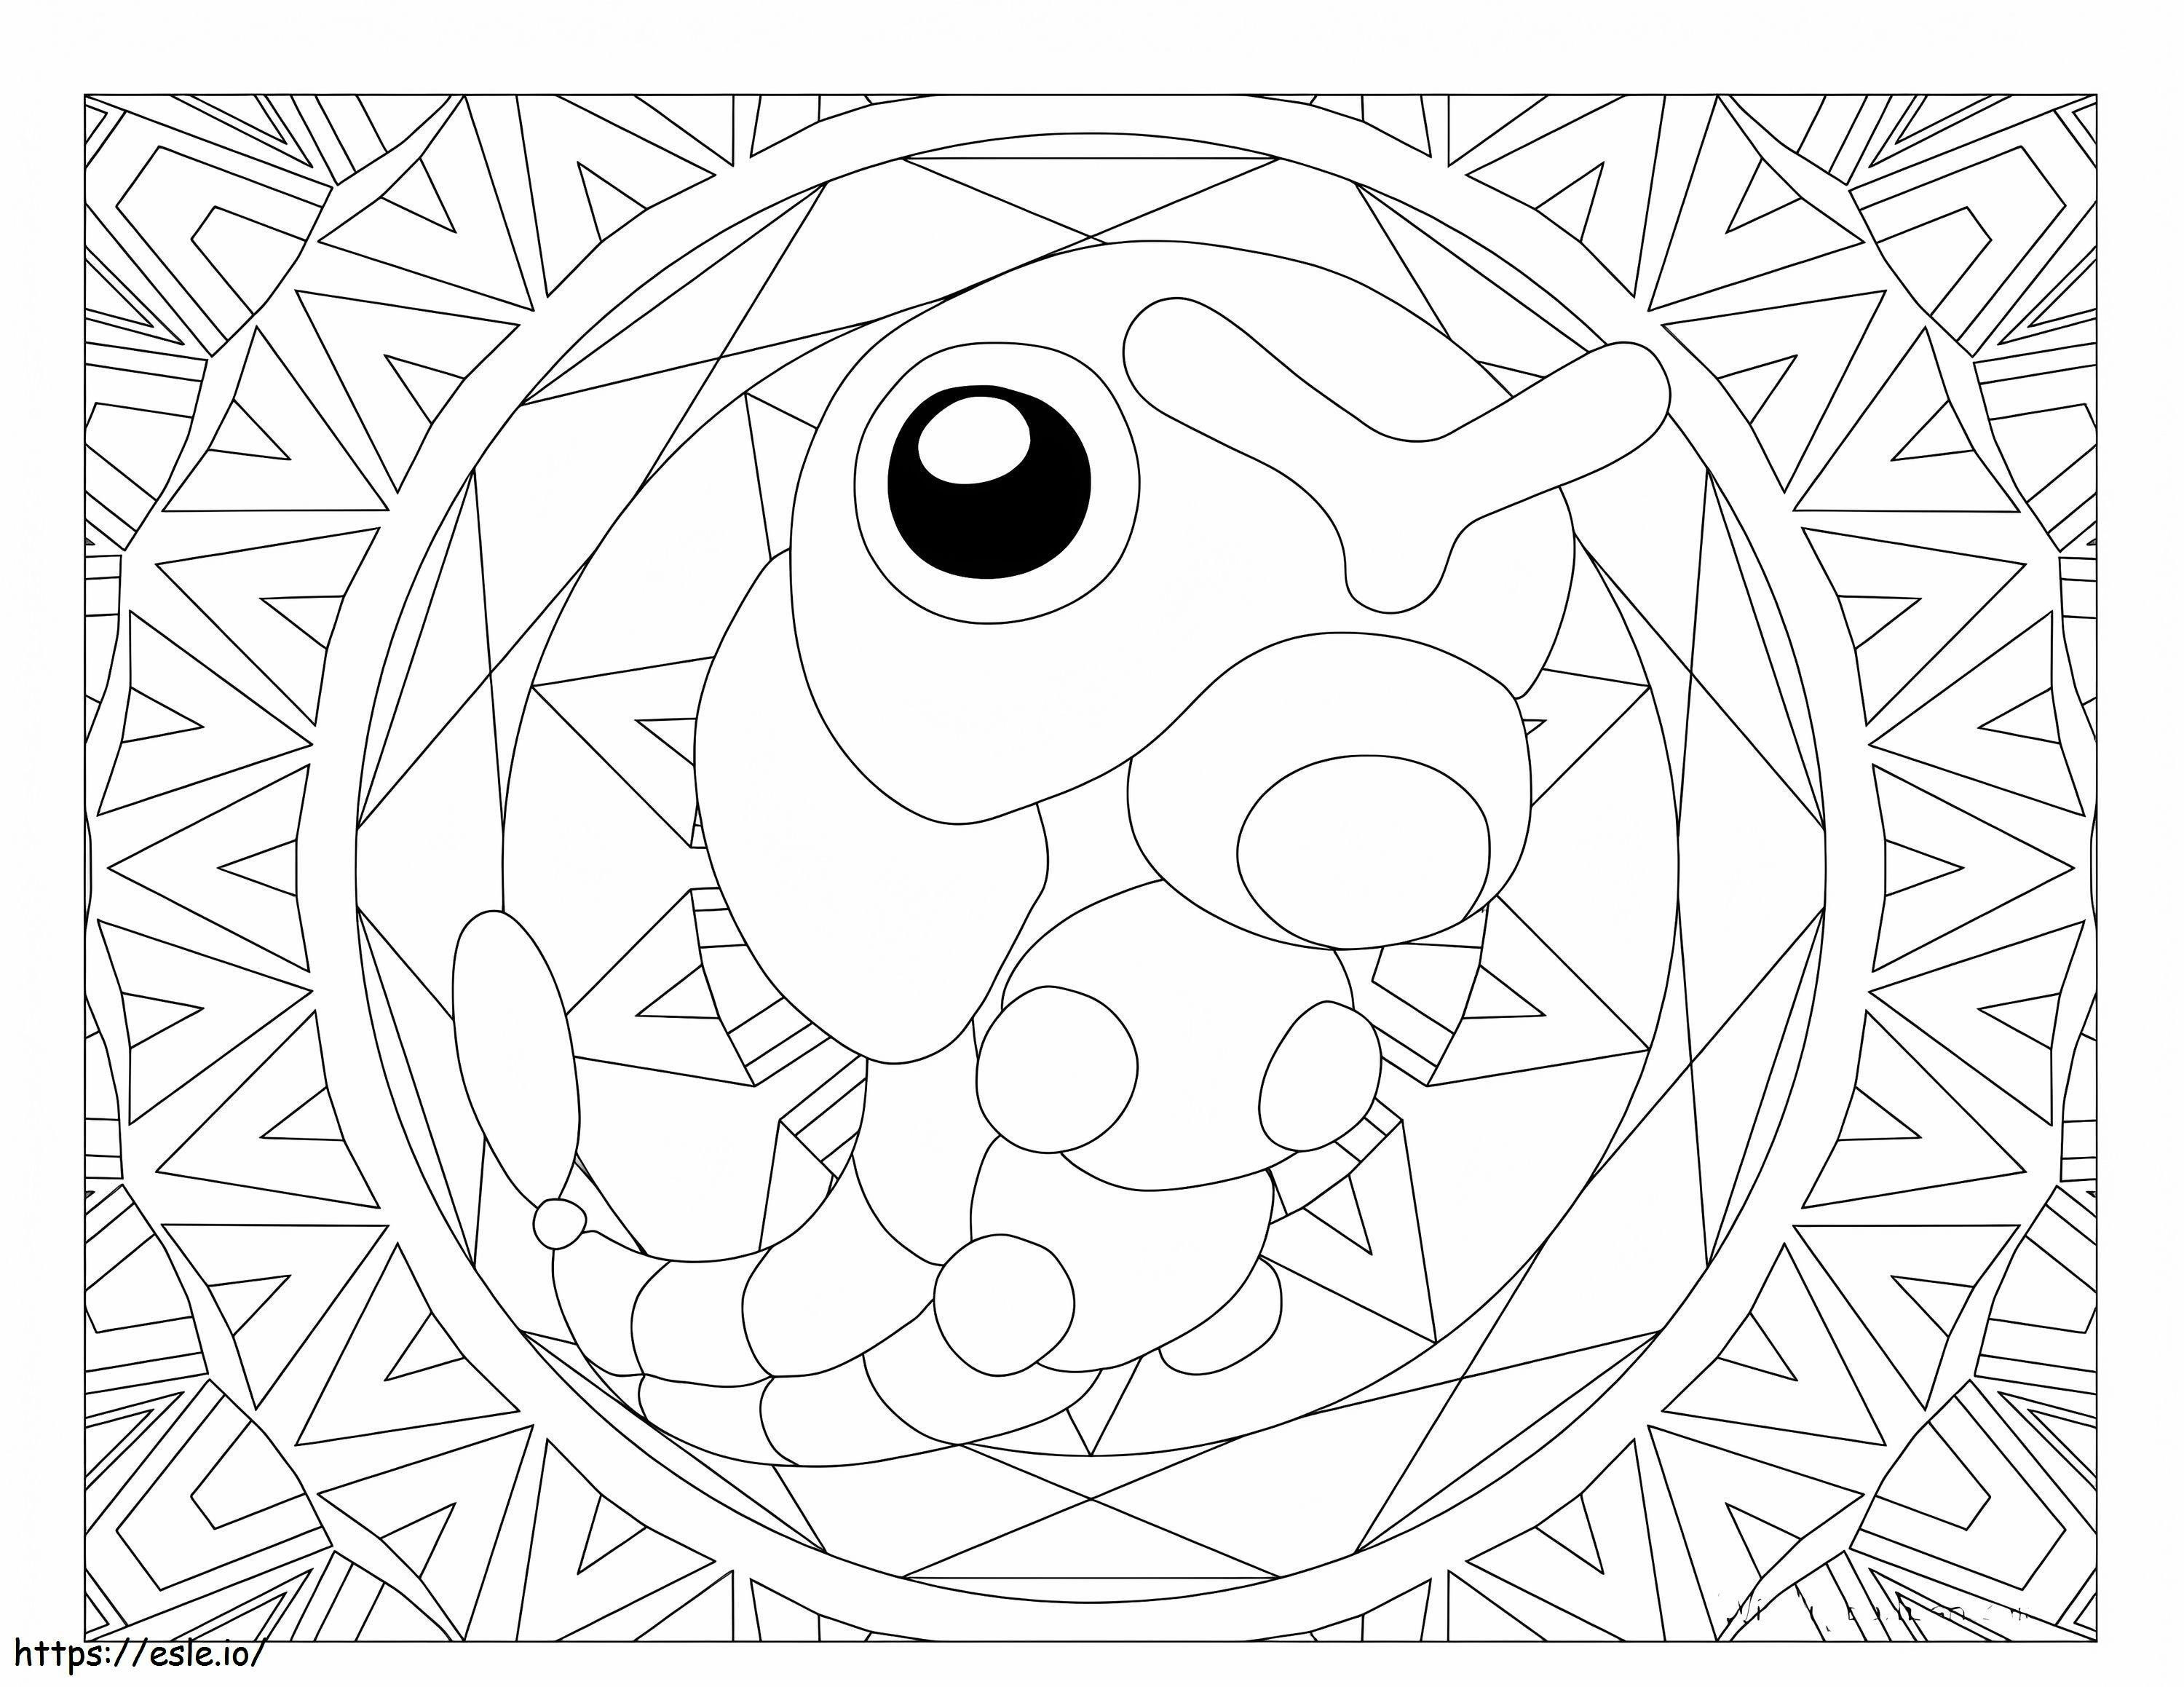 Caterpie 5 coloring page